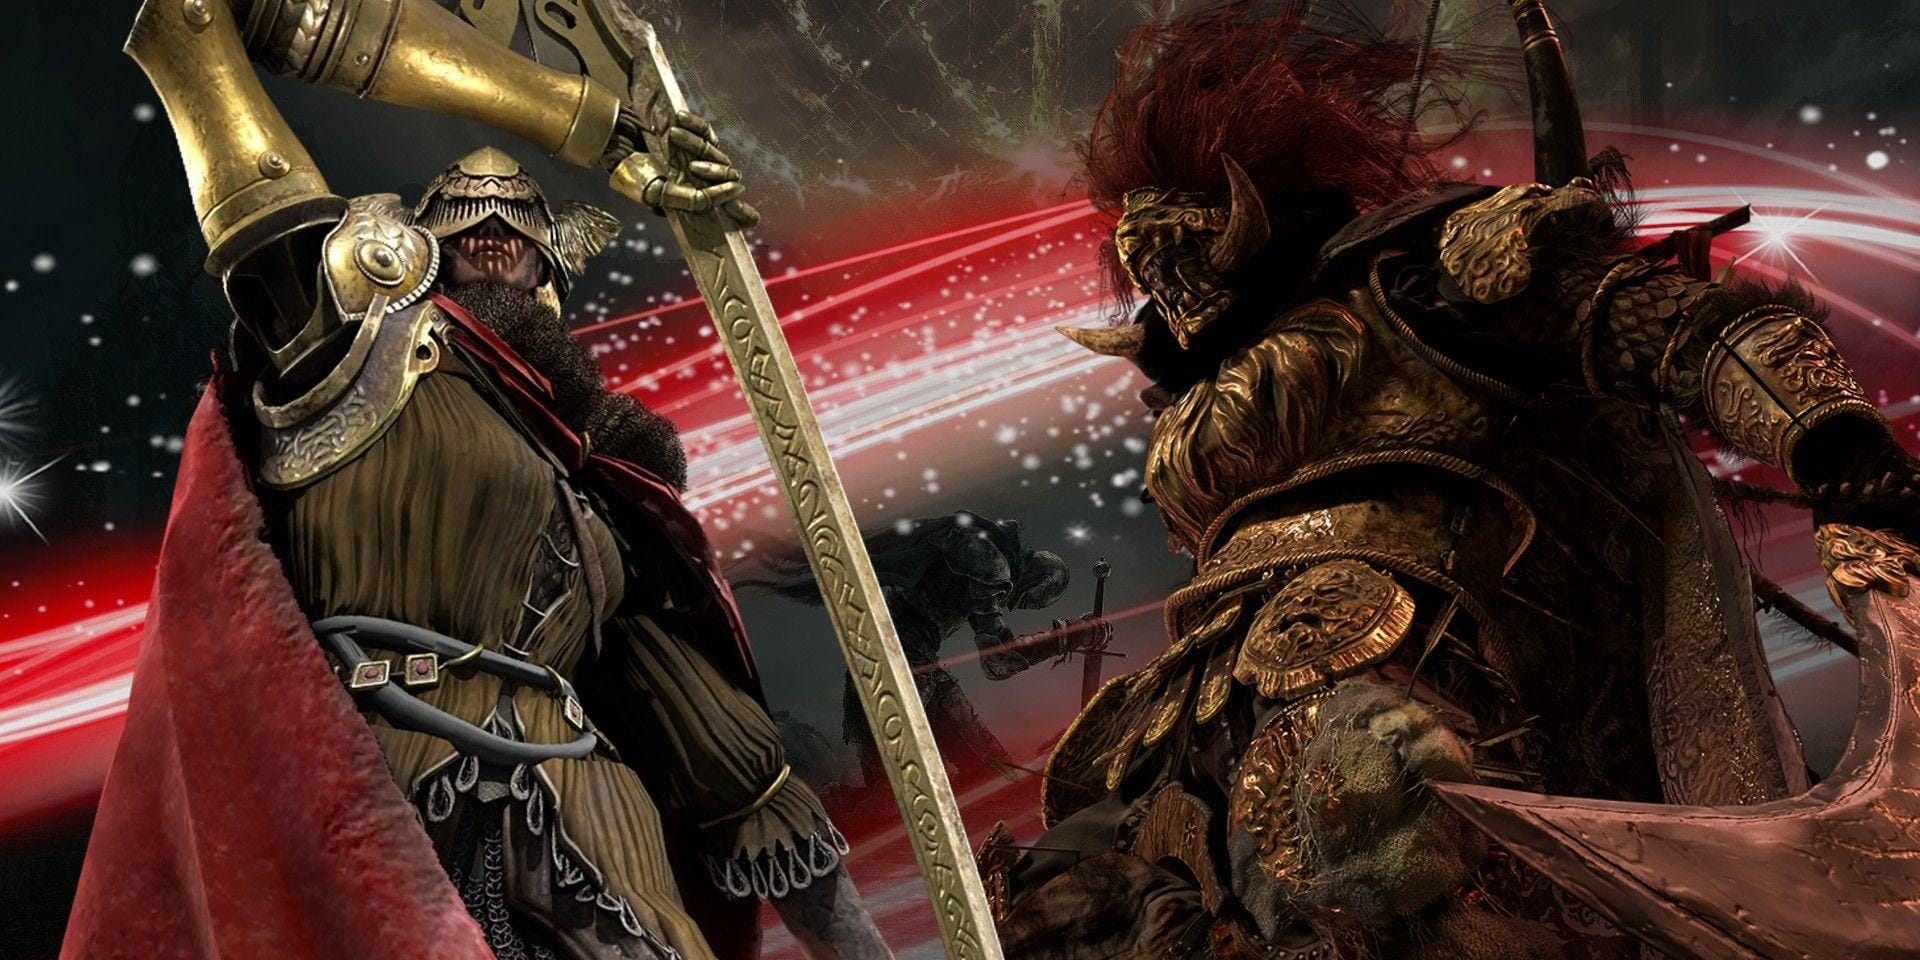 Elden Ring bosses Malenia and Radahn backed by a swirling red background, all in front of a dimmed close-up of the game's cover art.